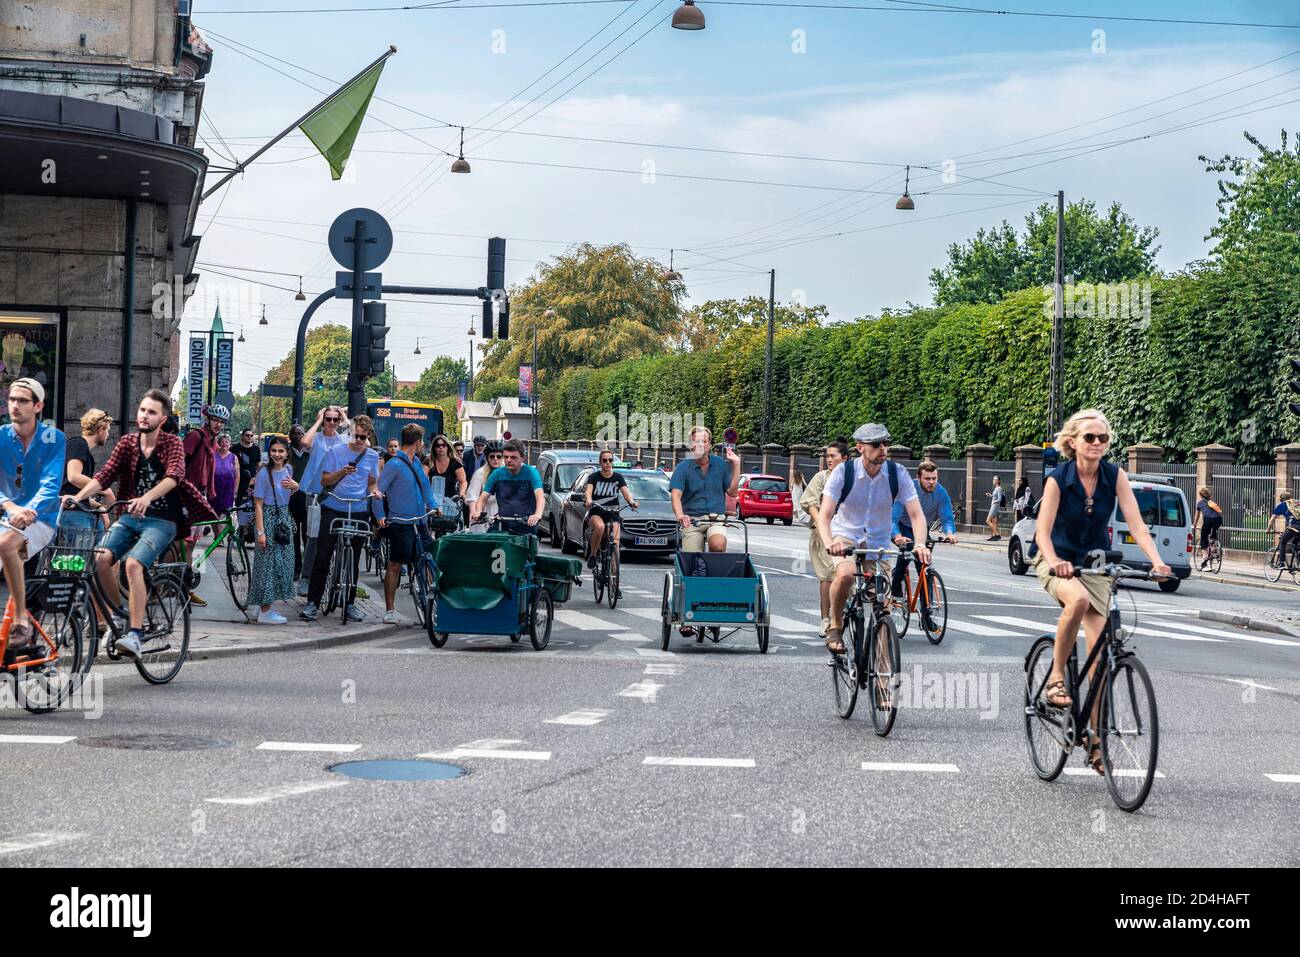 Copenhagen, Denmark - August 27, 2019: Street with people on bicycle and cargo bike cycling in the old town of Copenhagen, Denmark Stock Photo